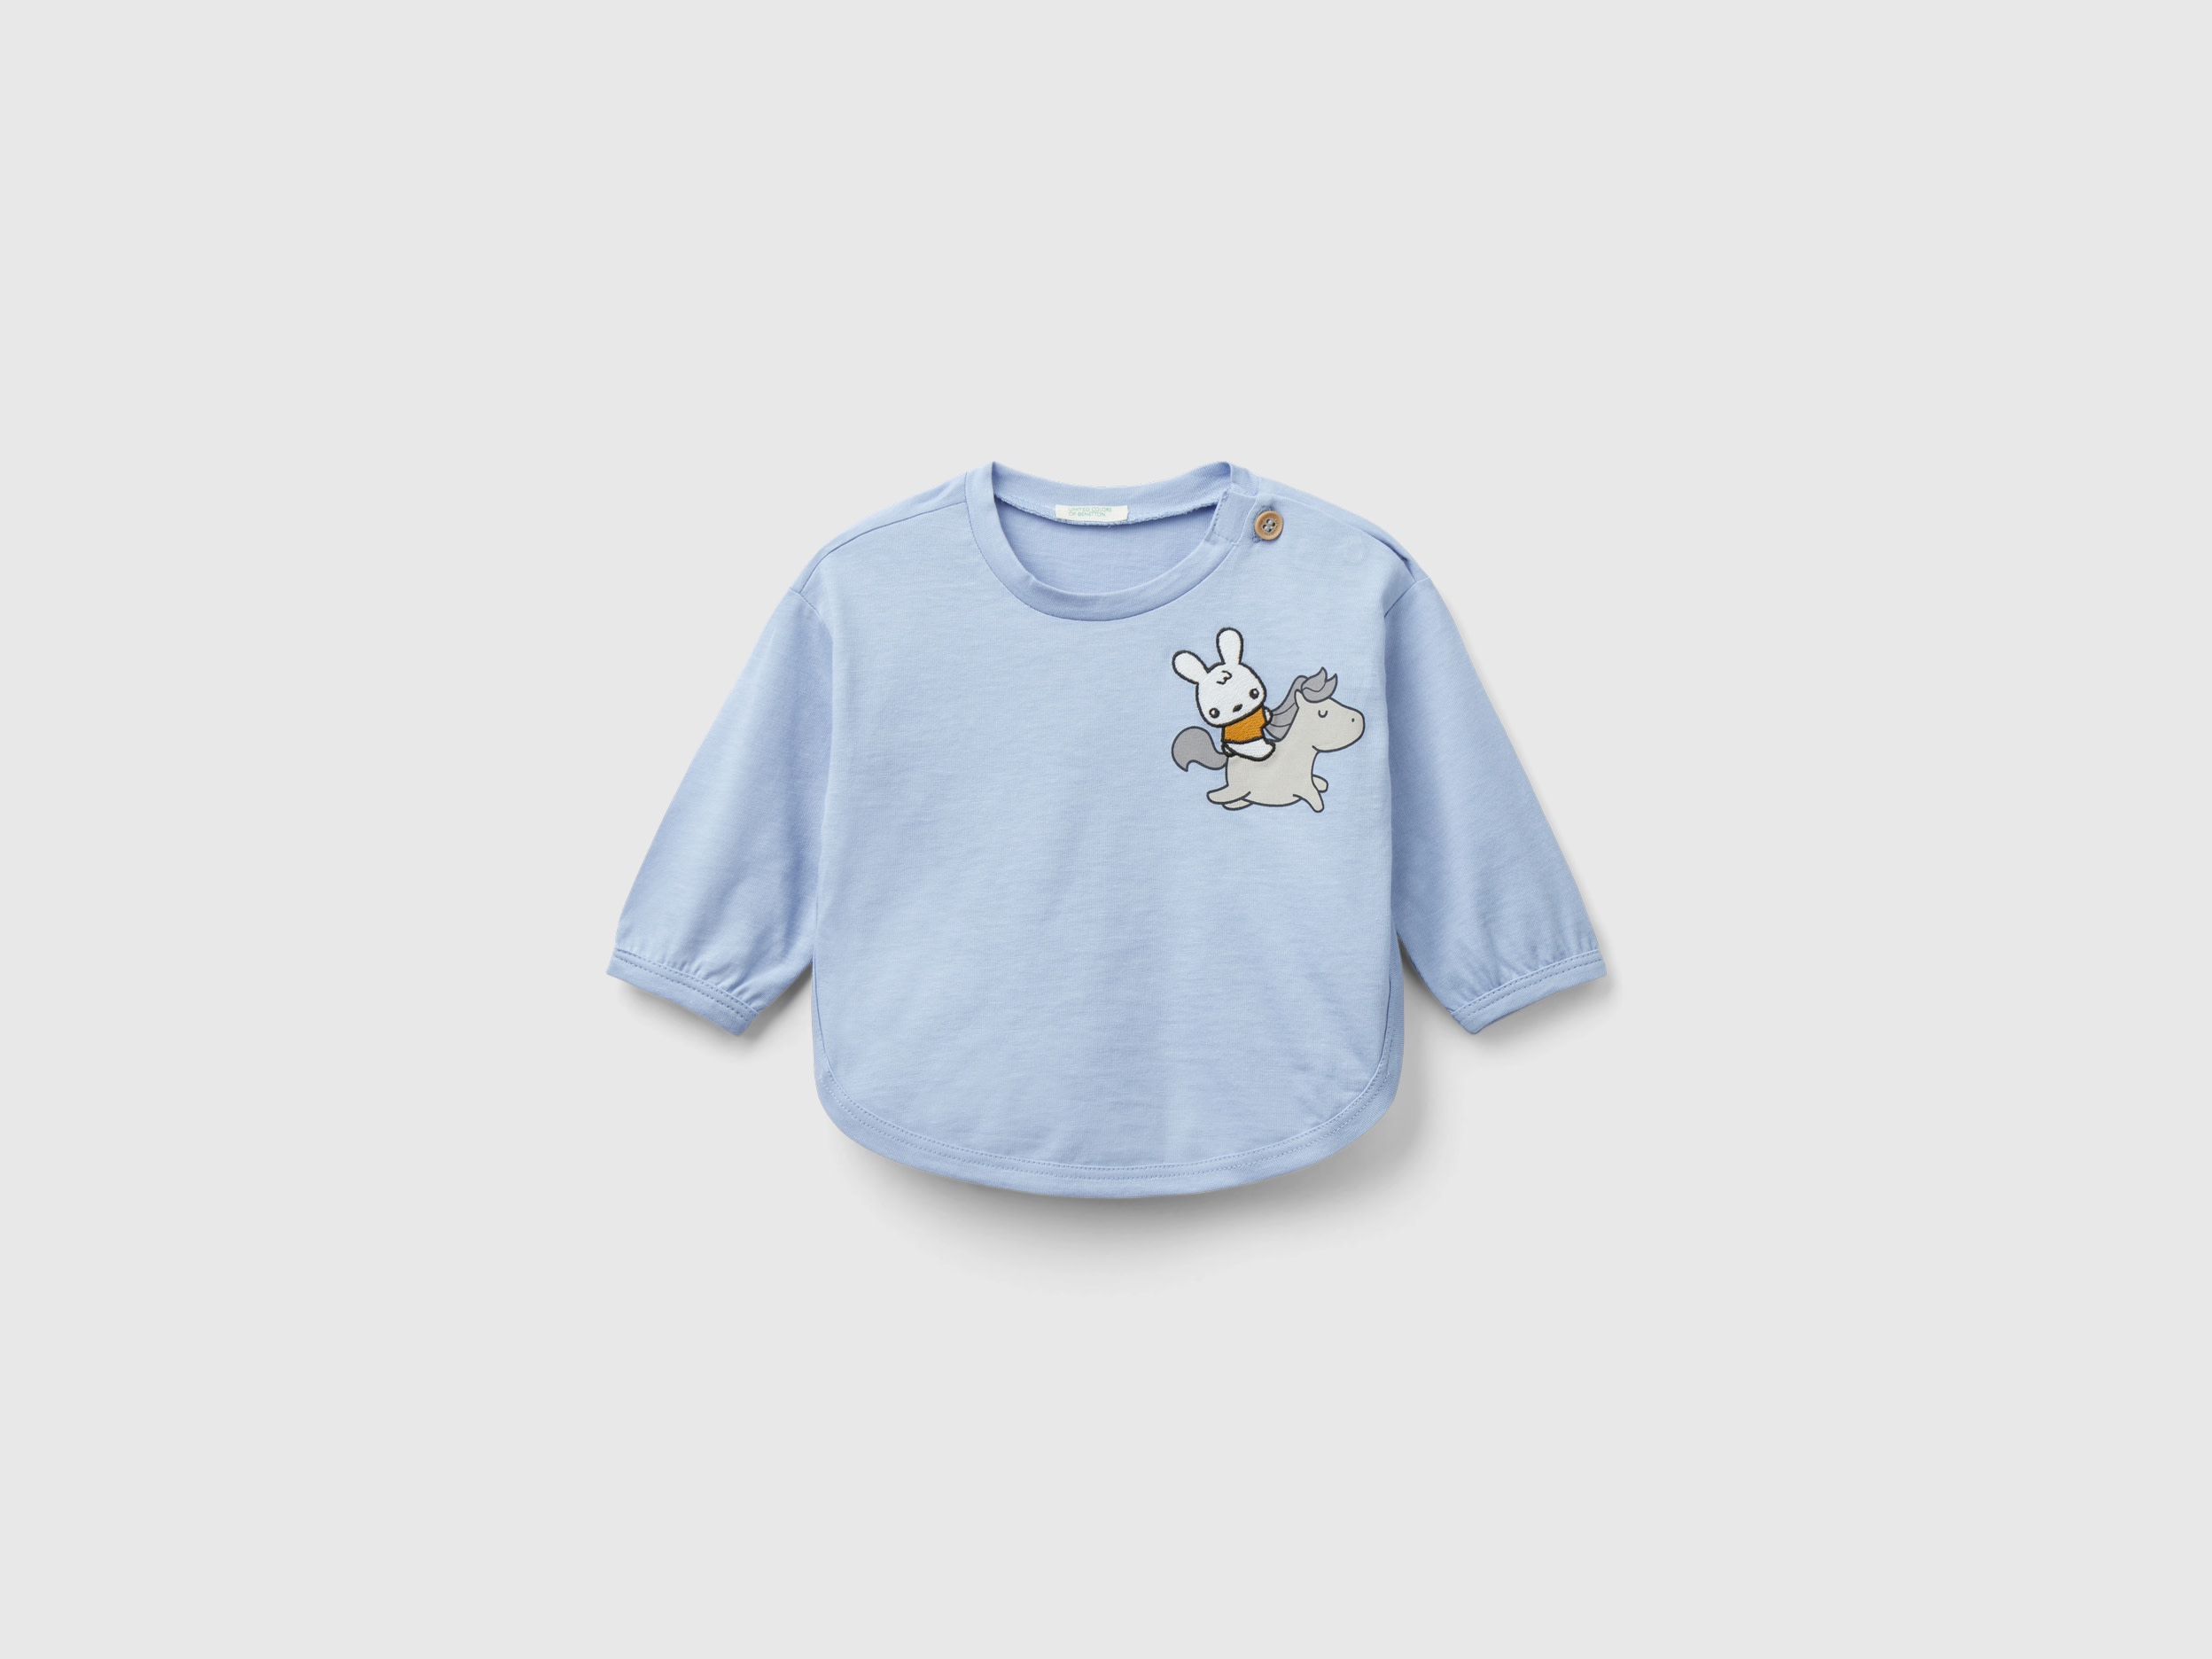 Image of Benetton, T-shirt In Organic Cotton With Print, size 62, Sky Blue, Kids